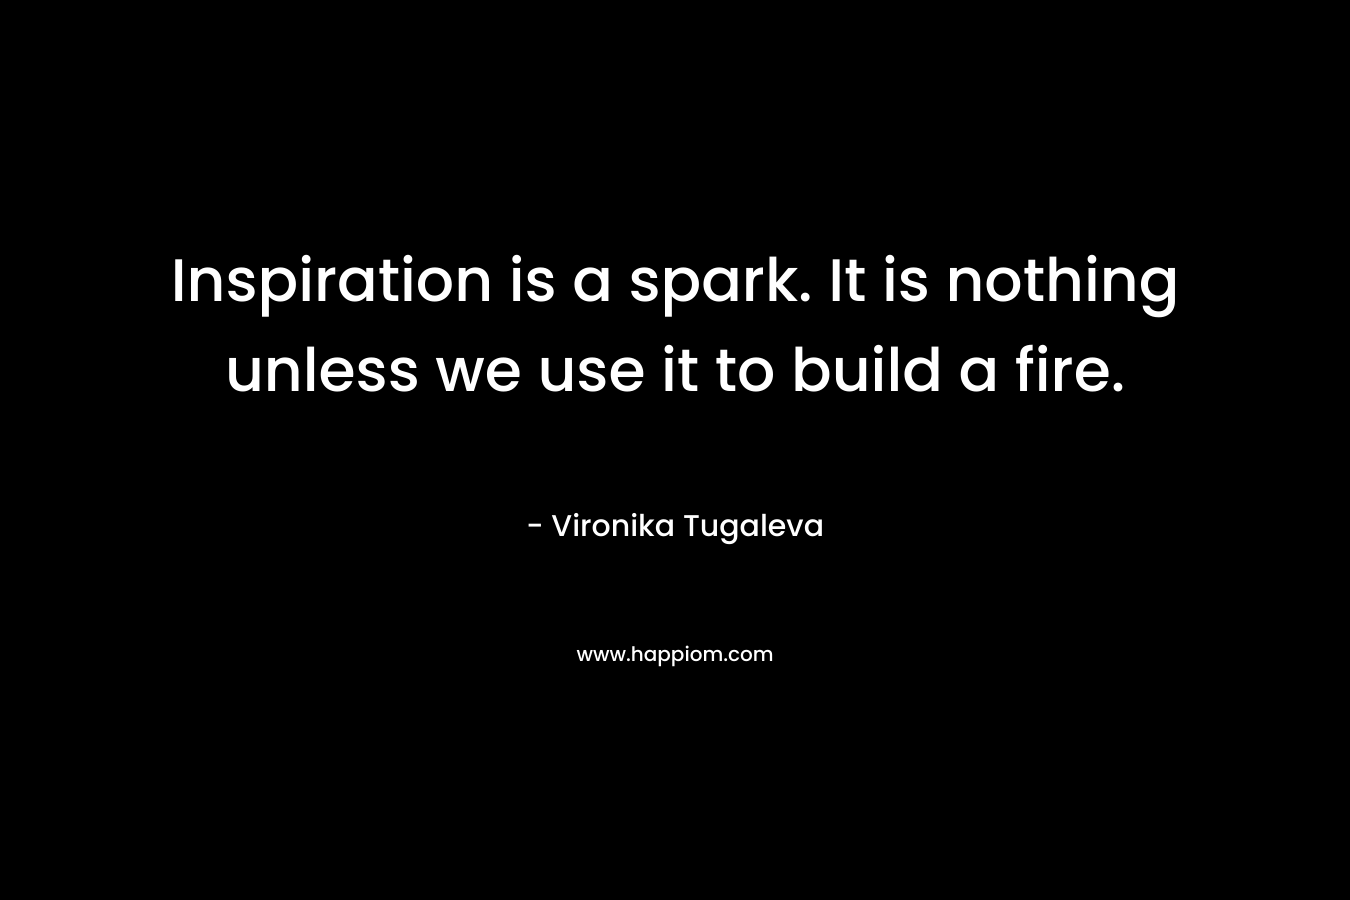 Inspiration is a spark. It is nothing unless we use it to build a fire.